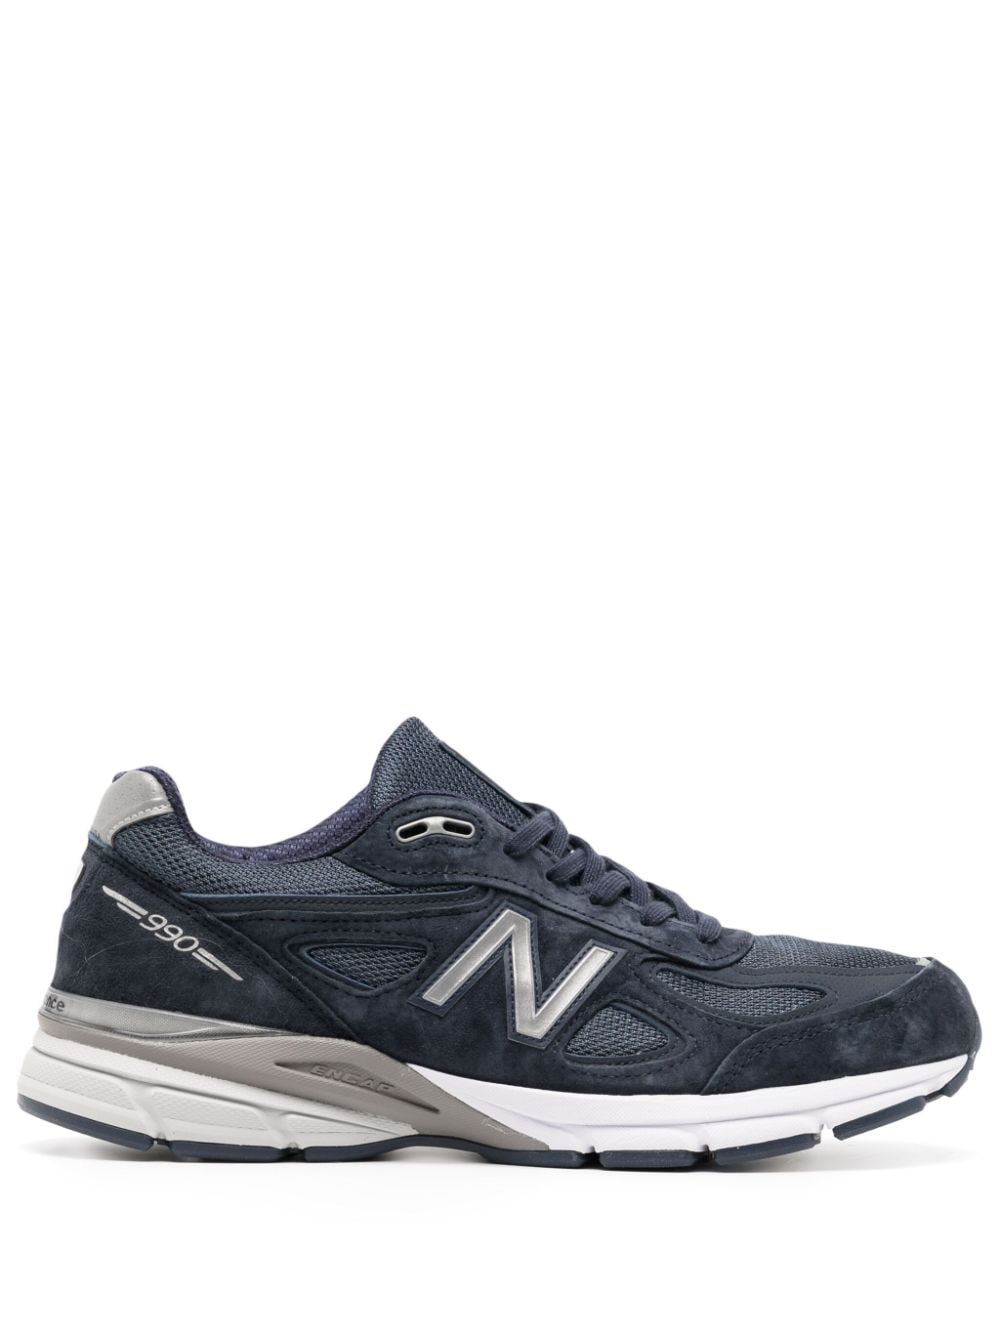 New Balance 990v4 low-top sneakers - Blue von New Balance